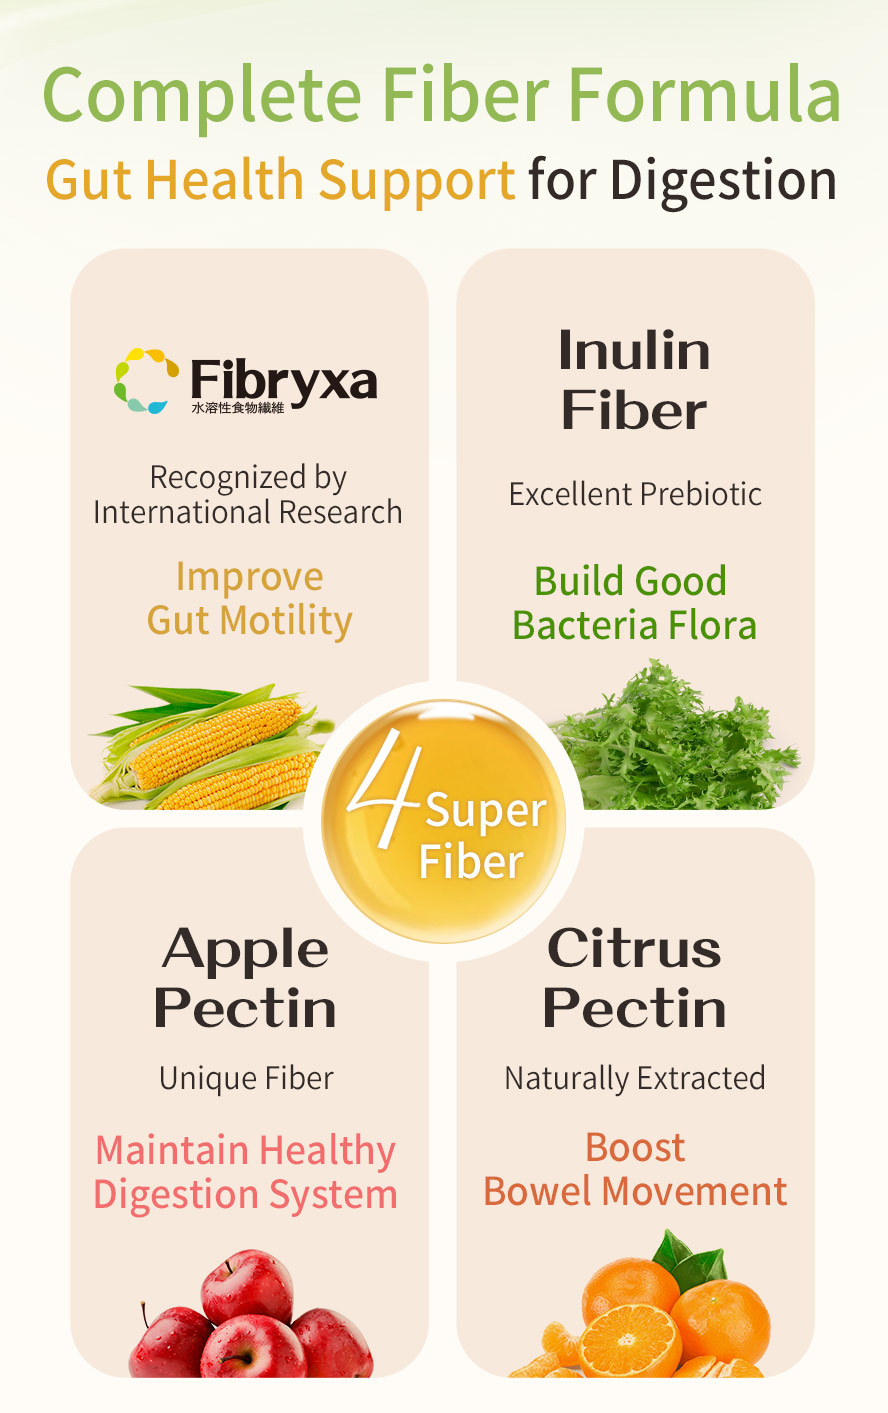 BHK's Dietary Fiber Drink contains 4 fiber formula to improve gut mobility, build good bacteria flora, maintain healthy digestion system, and boost bowel movement.